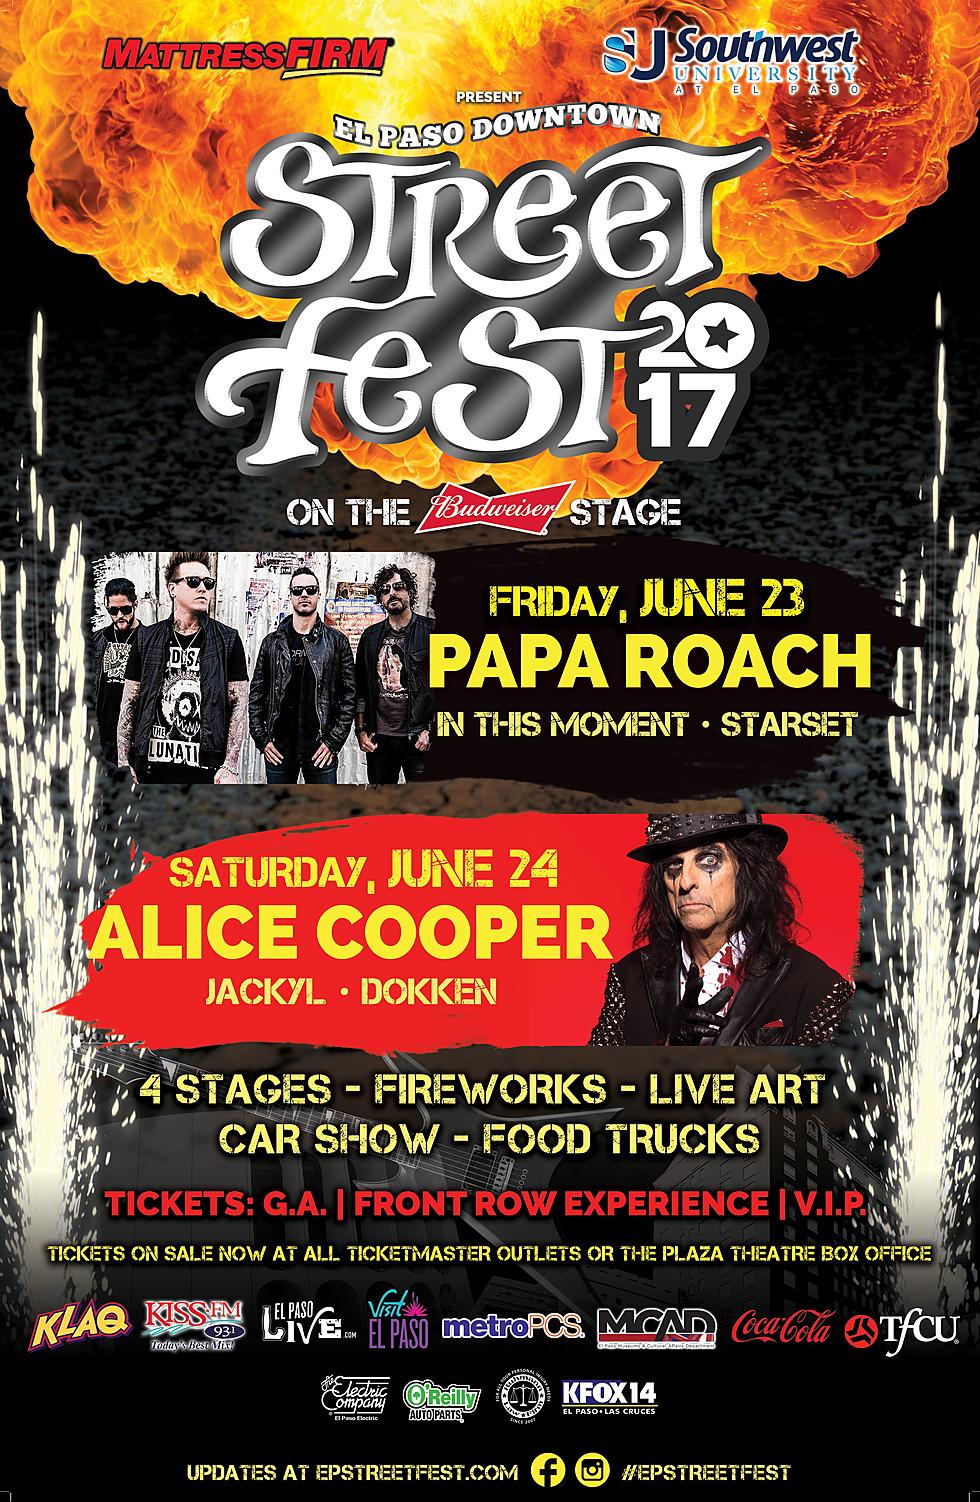 Will Papa Roach Have Maria Brink Join Them On Stage To Sing “Gravity” At The Downtown Street Festival?